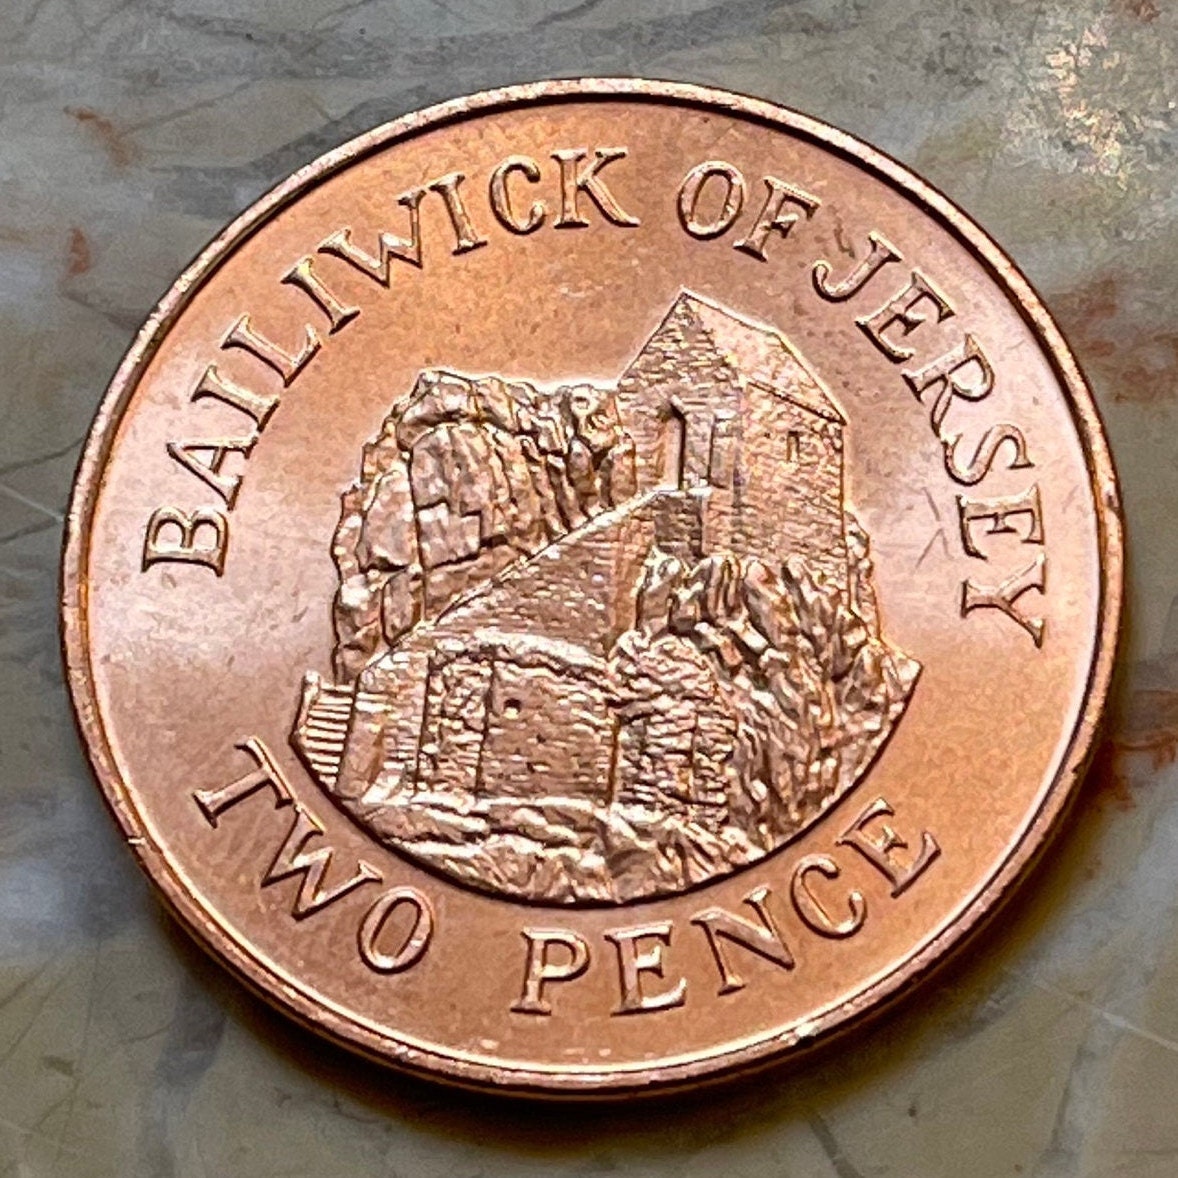 Hermitage of St Helier 2 Pence Jersey Authentic Coin Money for Jewelry and Craft Making (Bailiwick of Jersey)